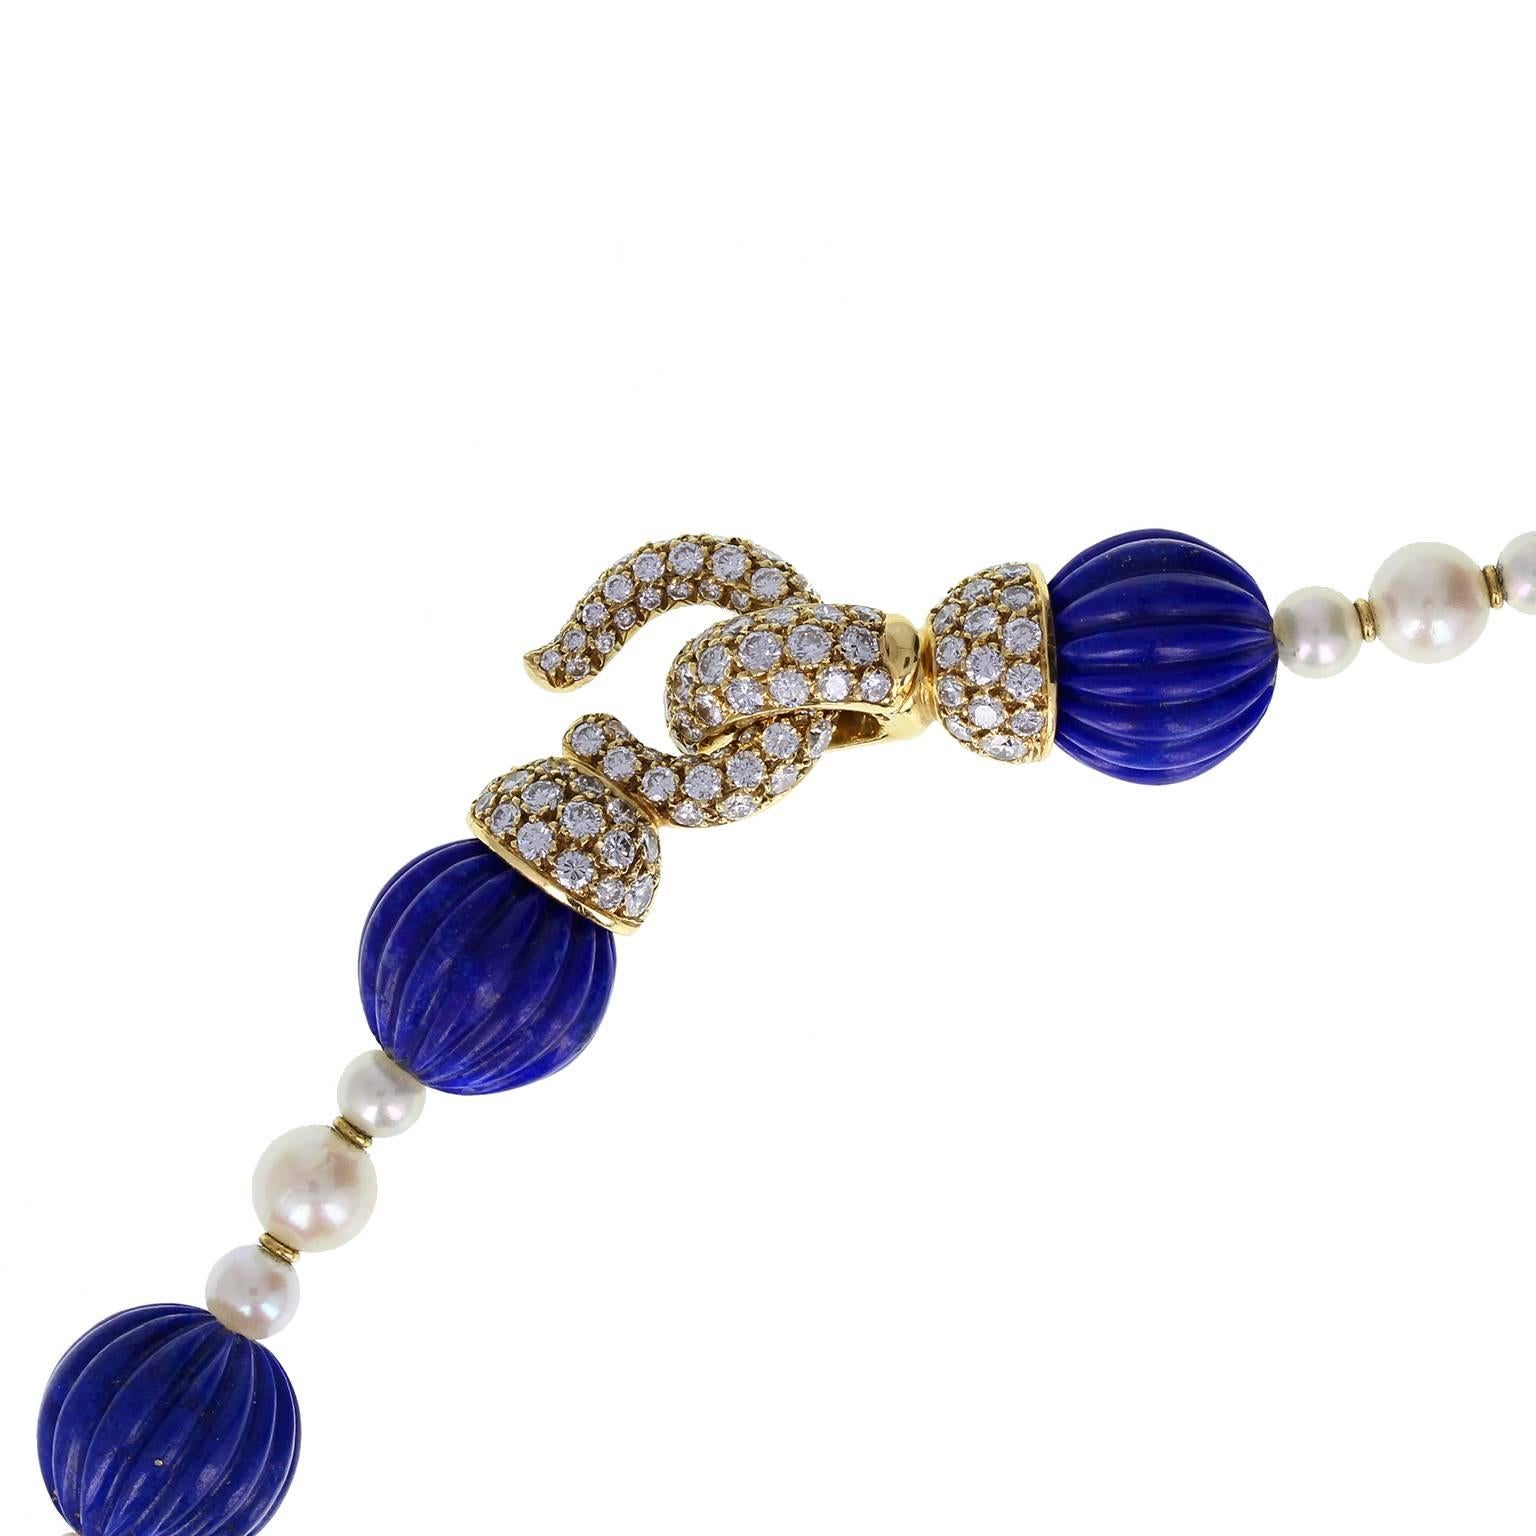 An exquisite sautoir by Cartier Paris. 26 ribbed beads of well-matched lapis lazuli are strung on silk, each interspersed with a trio of pearls, themselves separated by a pair of gold rondels. The eye-and-hook clasp is formed from 18-carat yellow